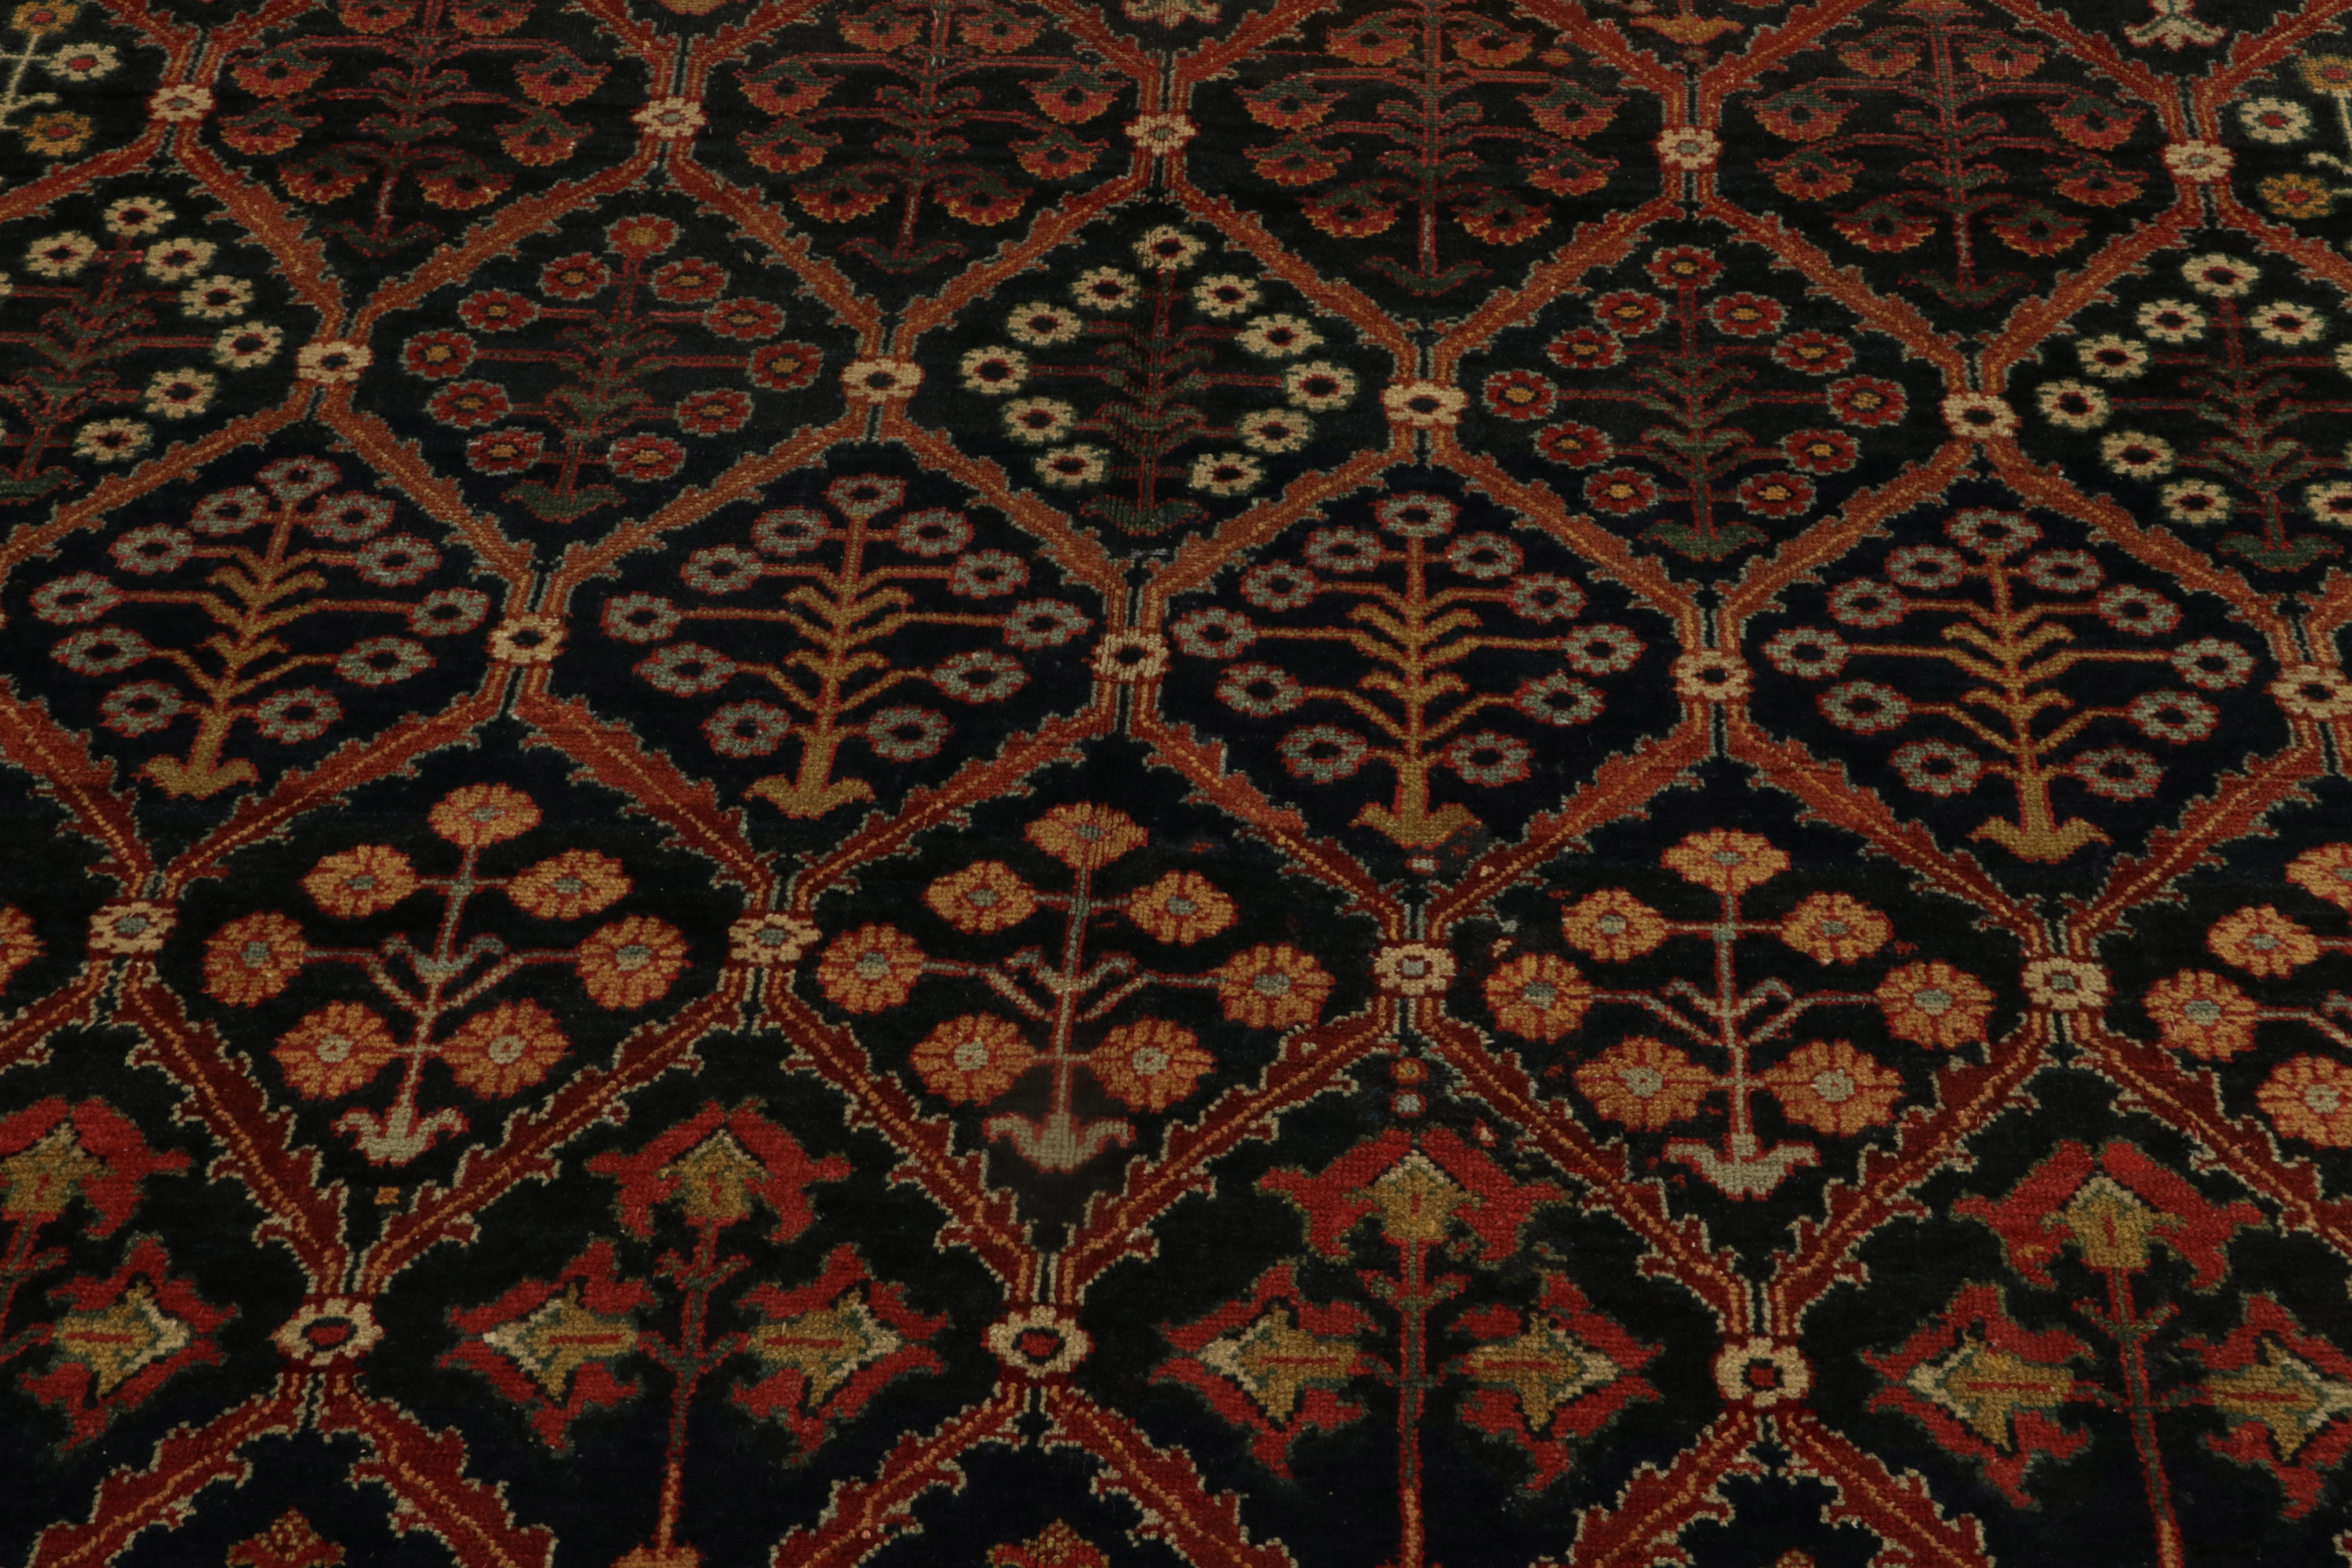 Wool Rare Antique Persian Joshaghan rug in Red, Black & Golden-Brown Floral Patterns For Sale